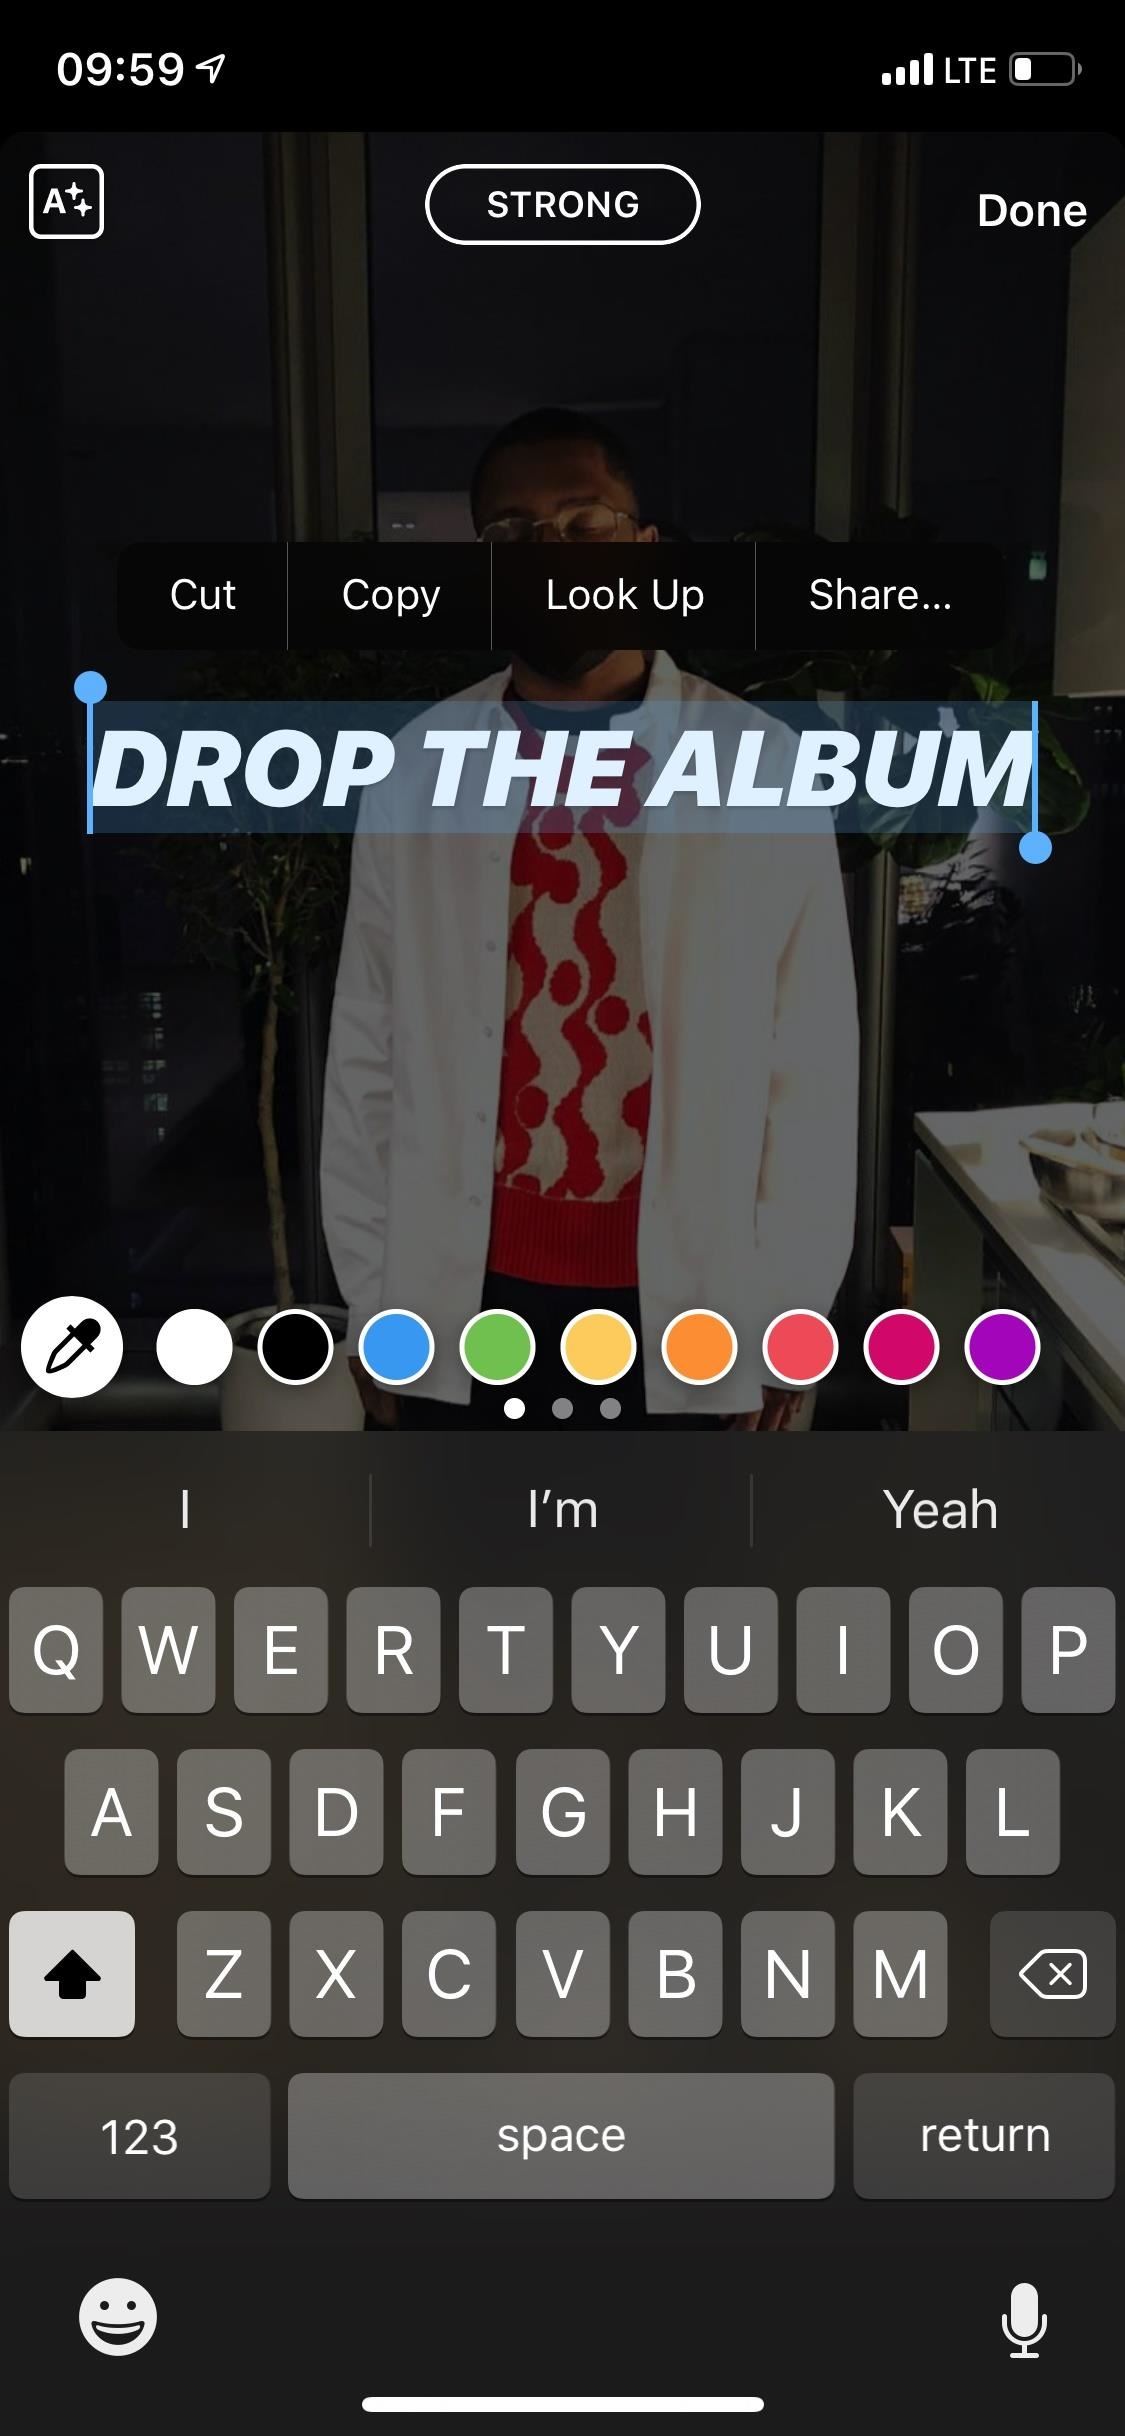 Use This Text Trick in Instagram Stories to Change Each Character's Color in Seconds